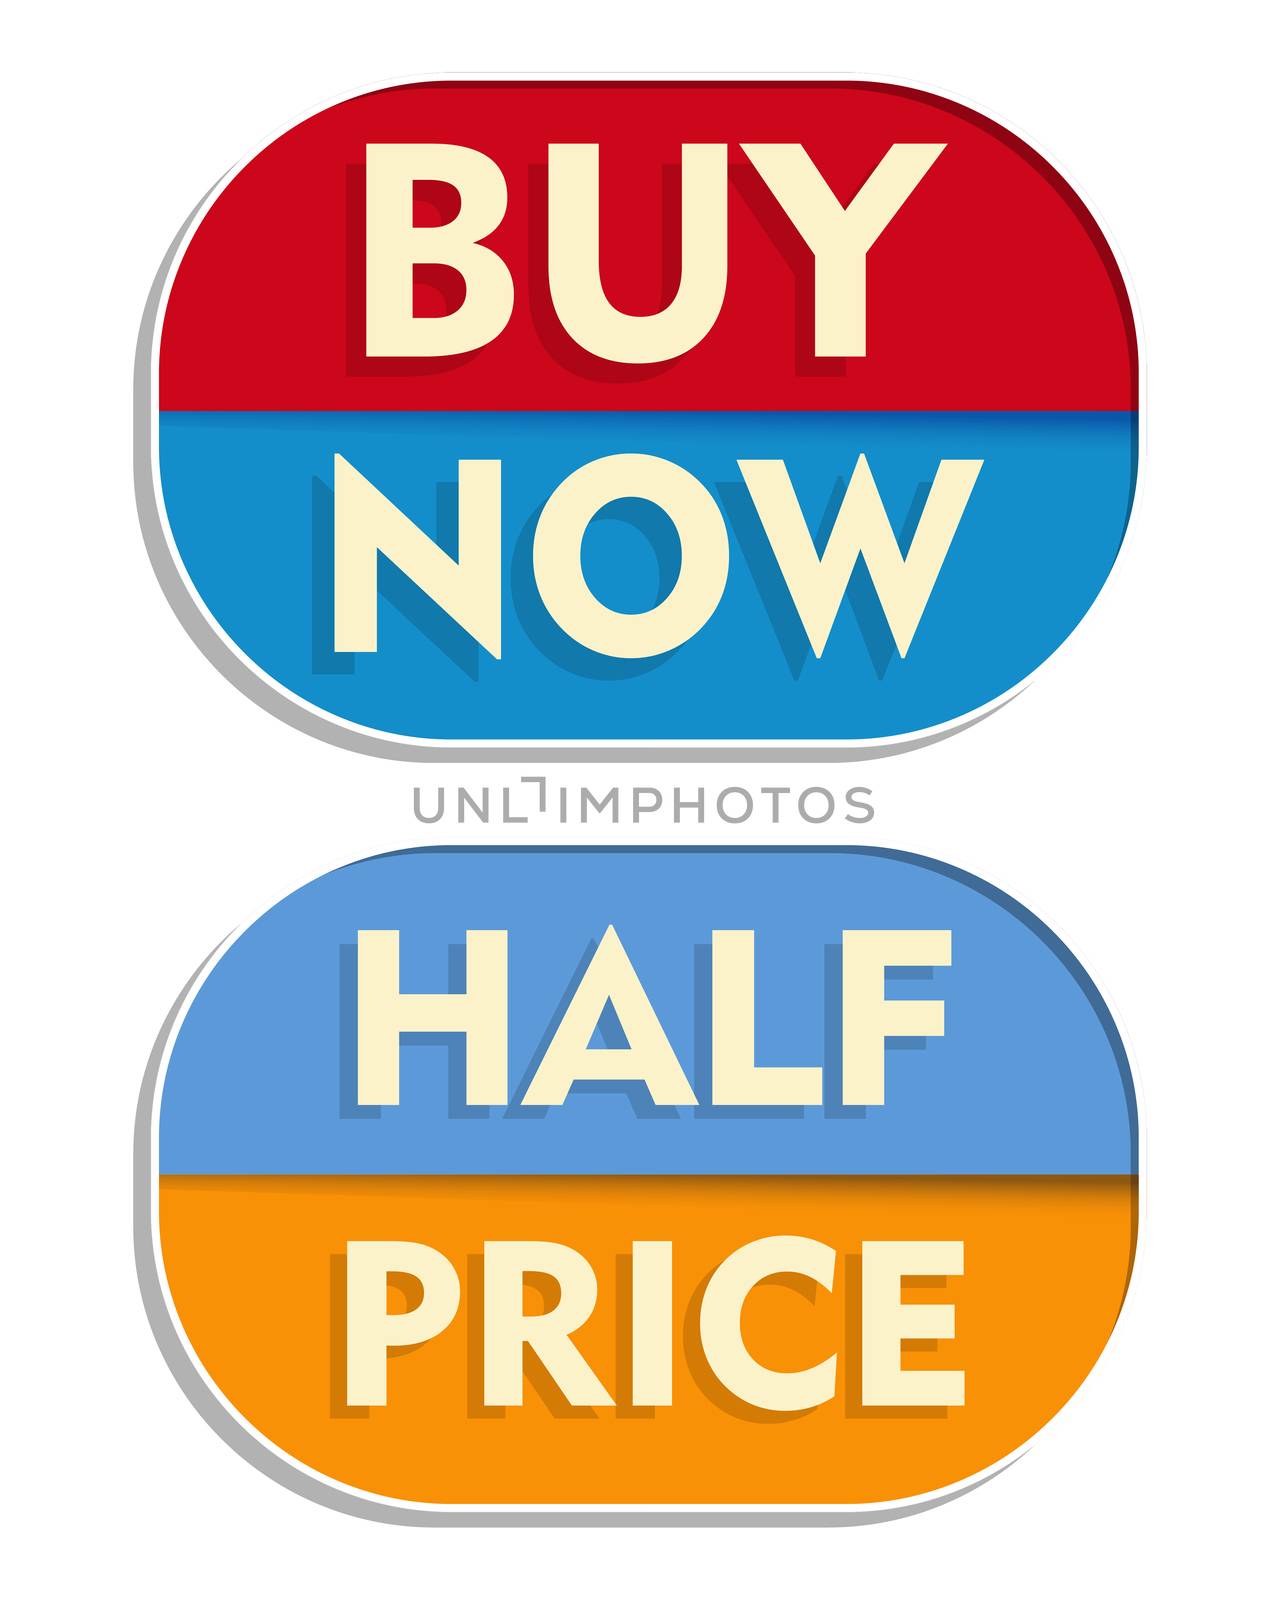 buy now and half price text banners, two elliptic flat design labels, business shopping concept